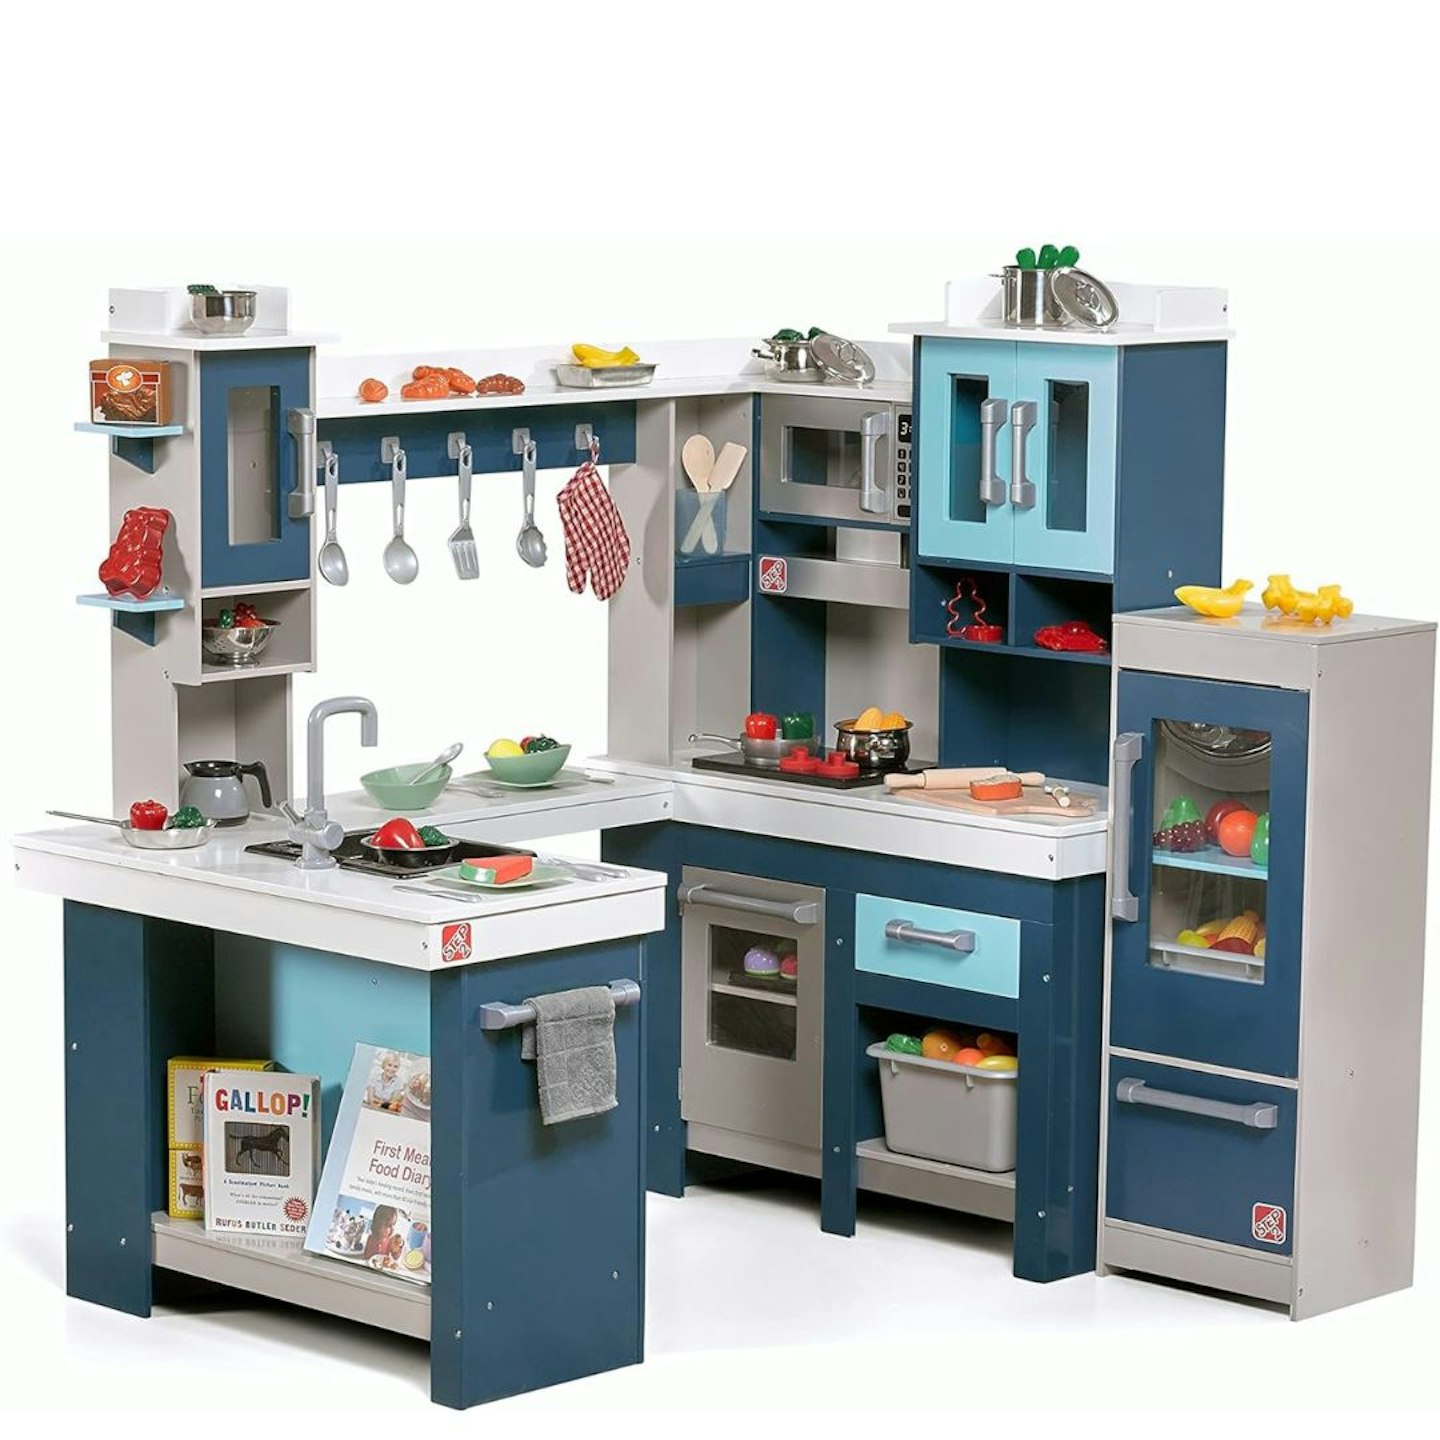 Step2 Grand Walk-In Play Kitchen made of wood